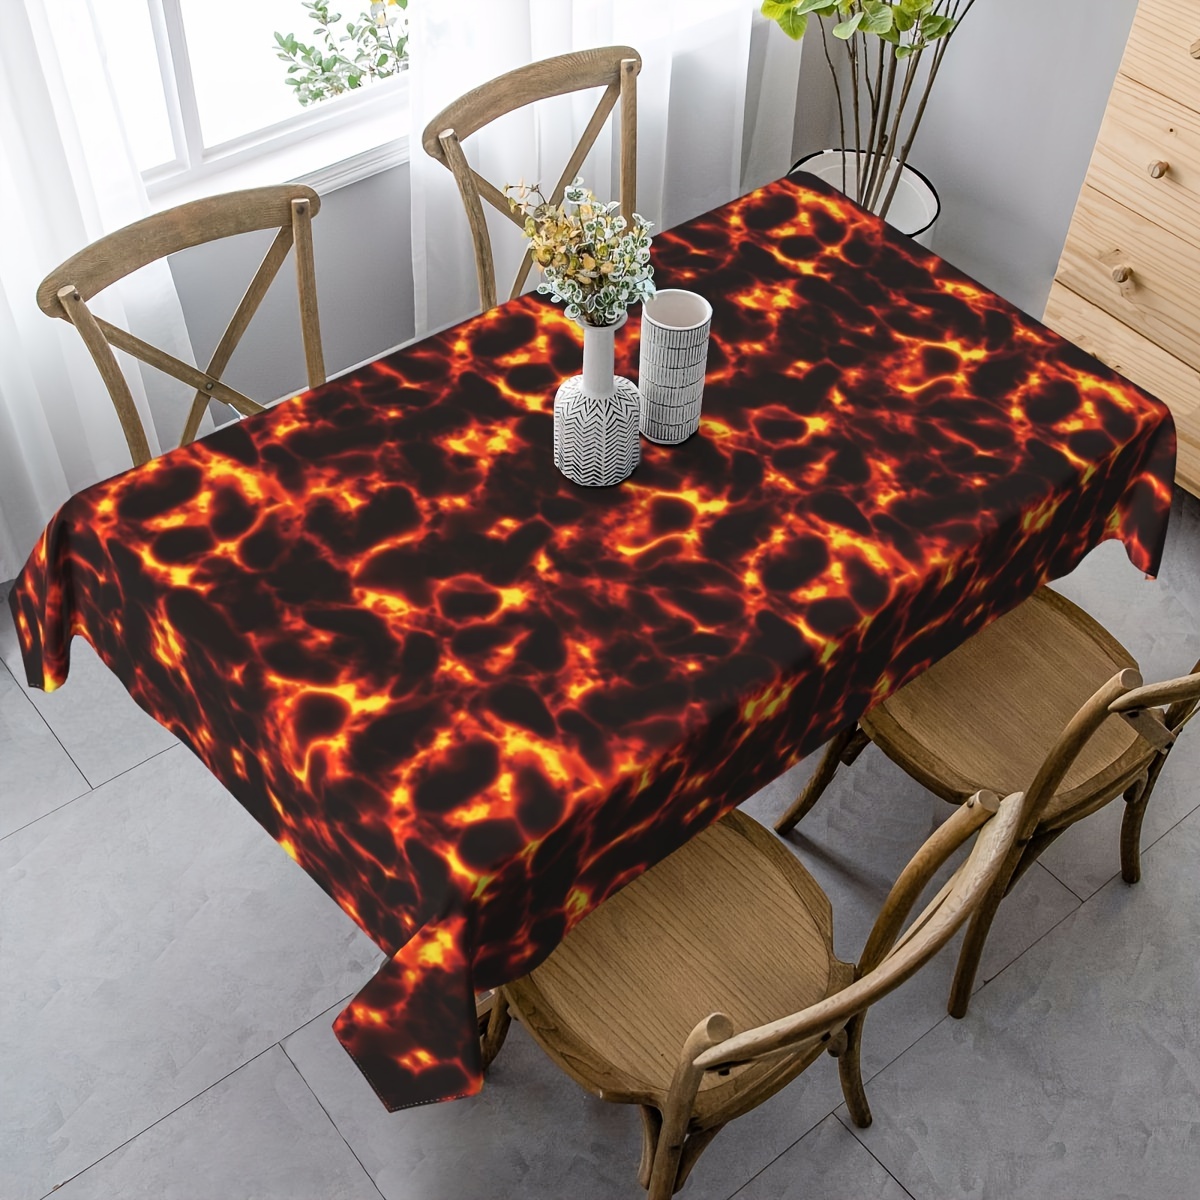 

1pc, Lava Tablecloth, Volcano Decorations, Halloween Plastic Table Covers, Lava Party Supplies, Volcano Tablecloth, Fire Table Covers, Waterproof Oil Resistant Tablecloth For Home Party Decor